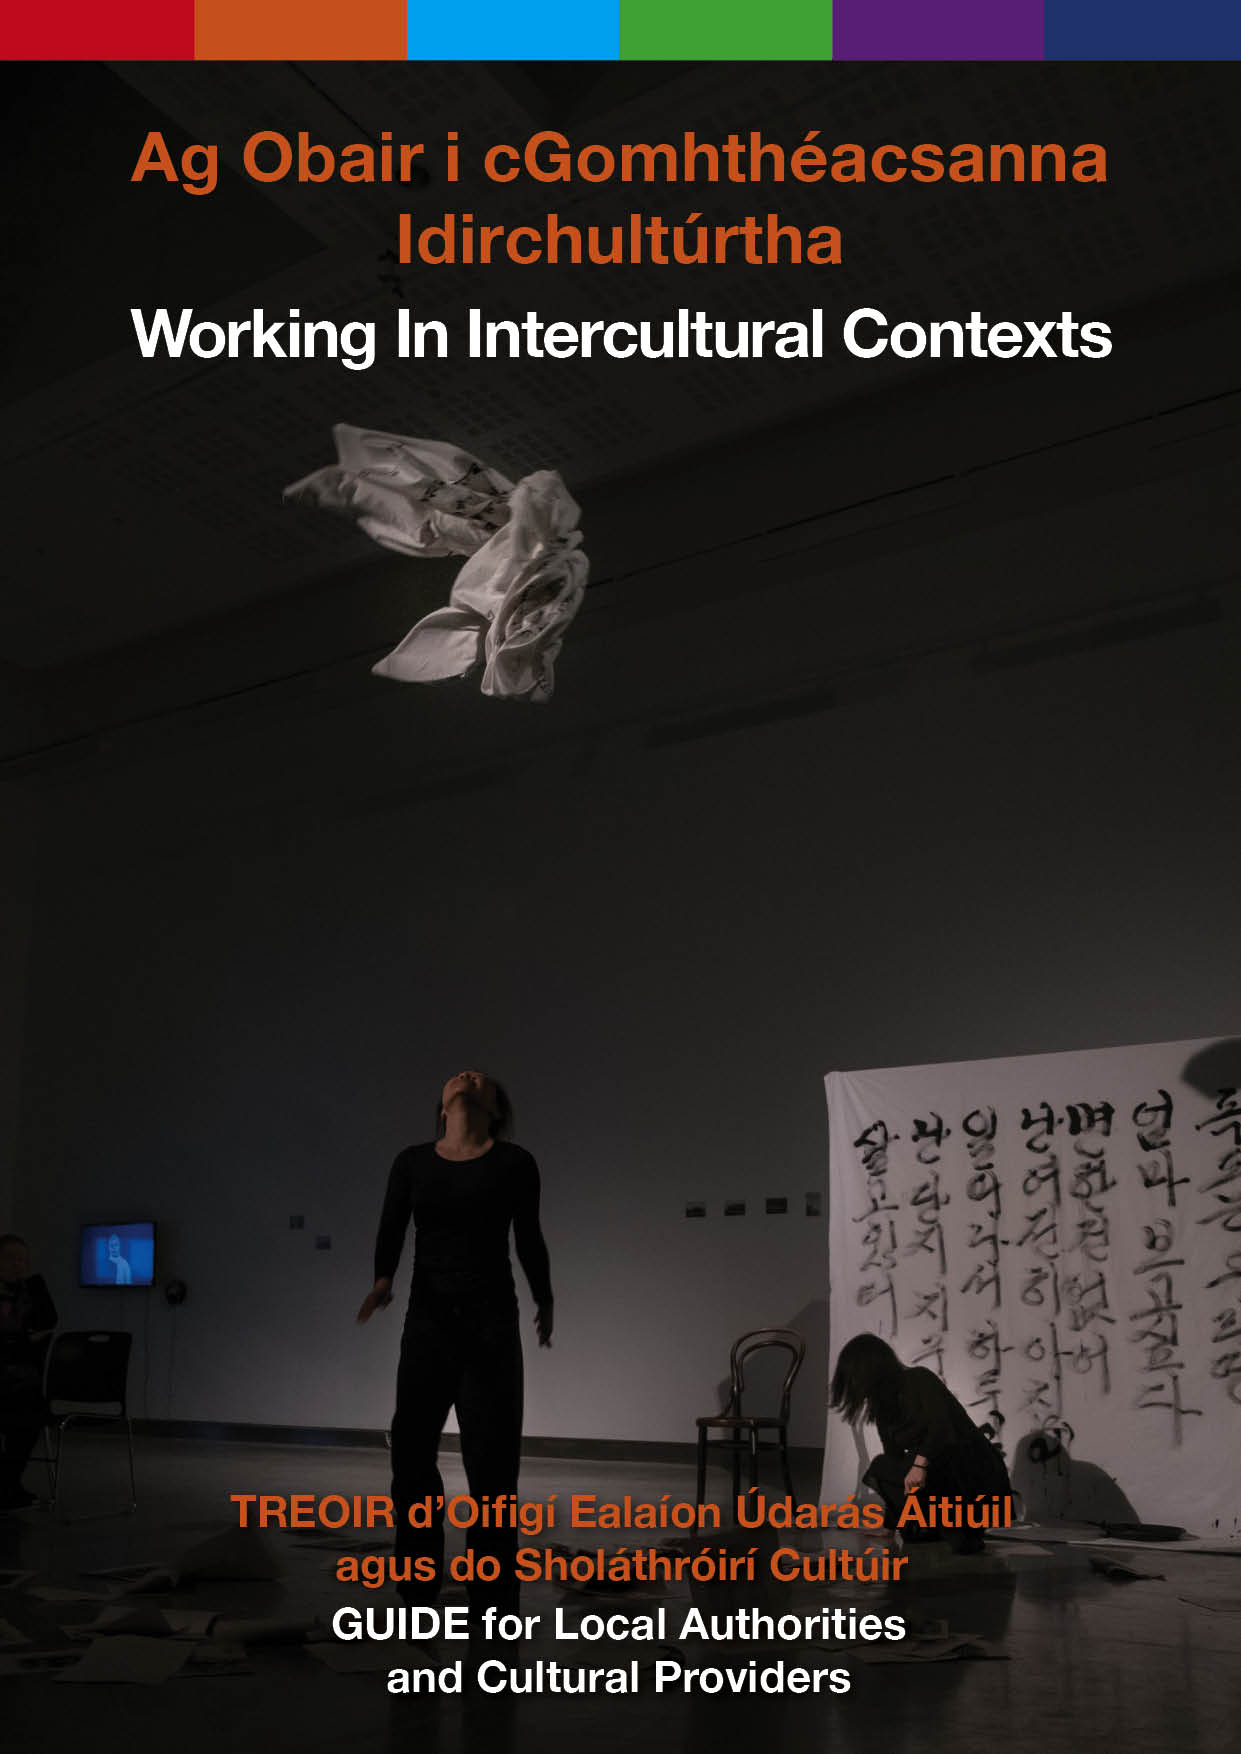 Working in Intercultural Contexts Guide